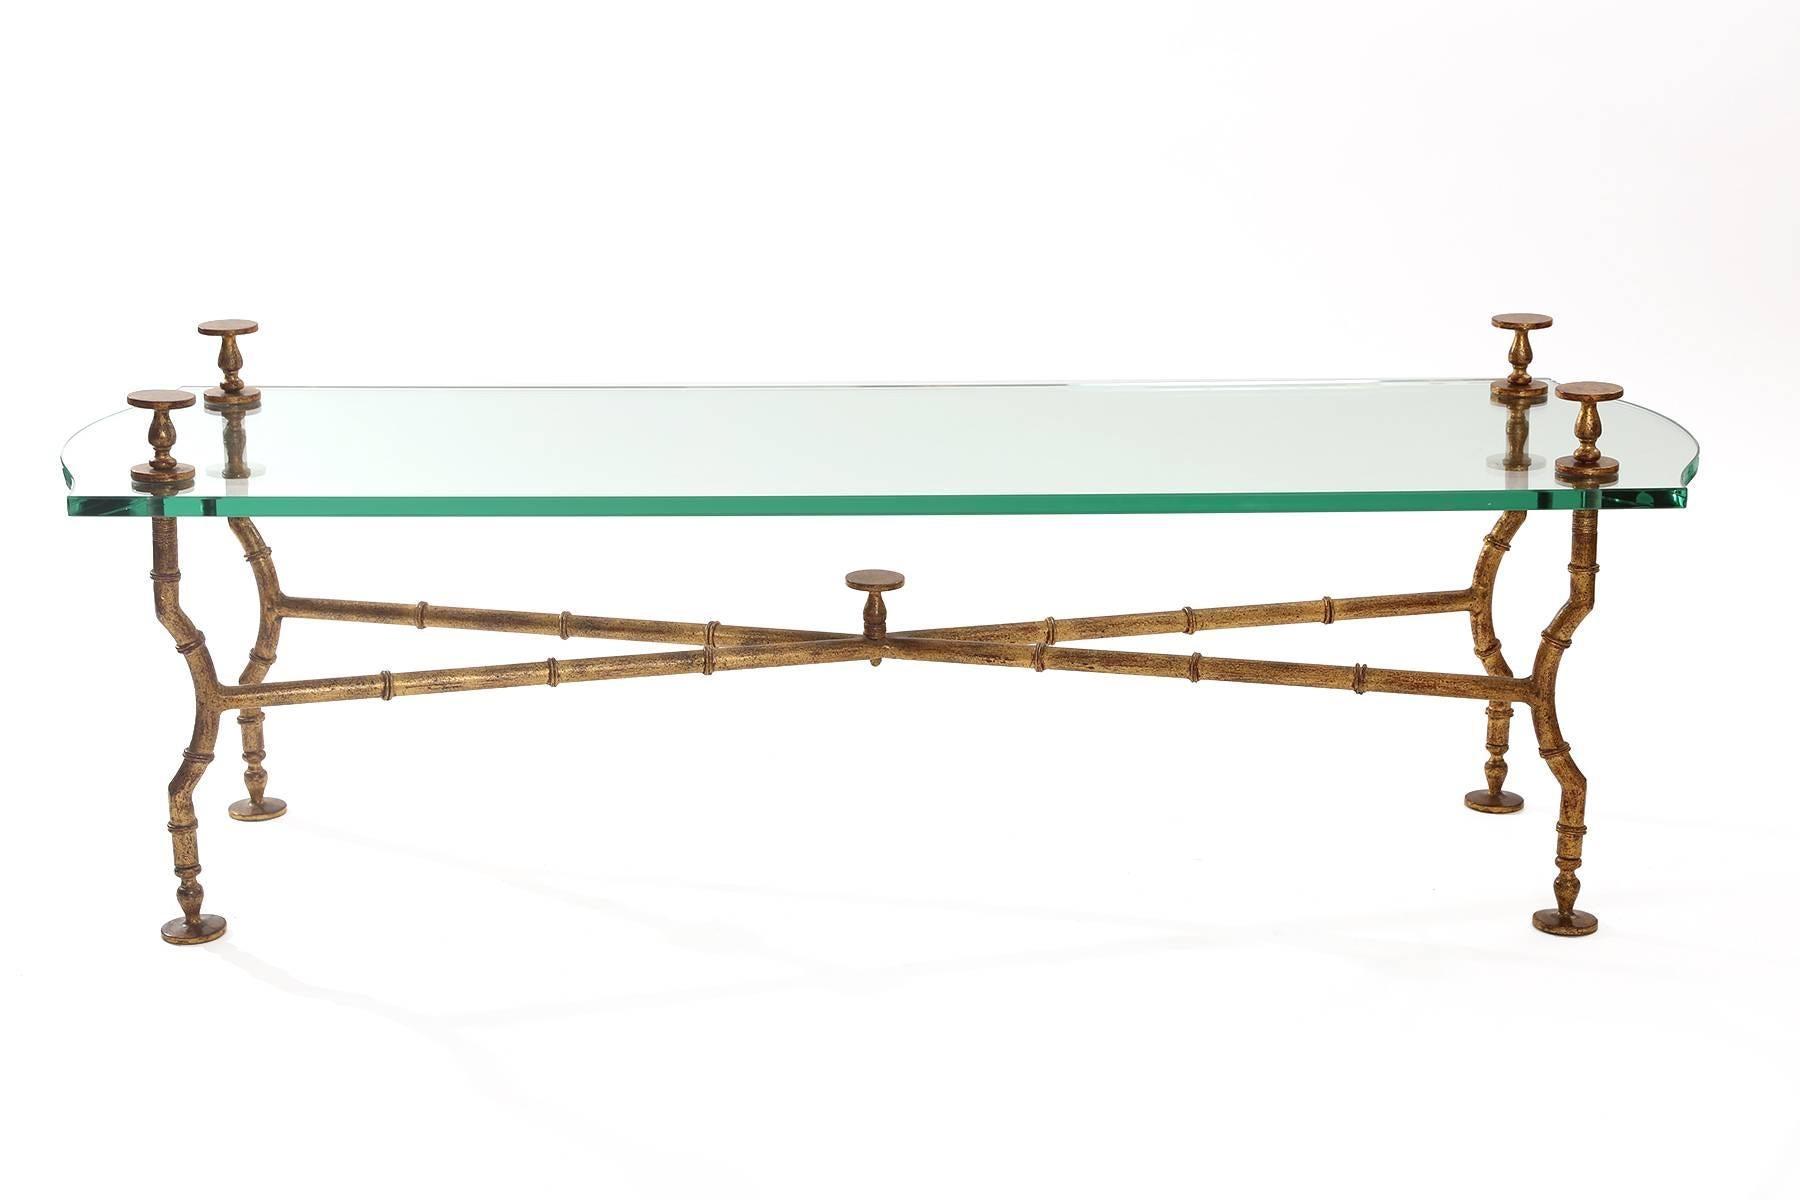 Stunning gold leafed steel and glass cocktail table after Maison Baguès and Giacometti. This all original example has striated legs stretchers and finials and original glass top.

.